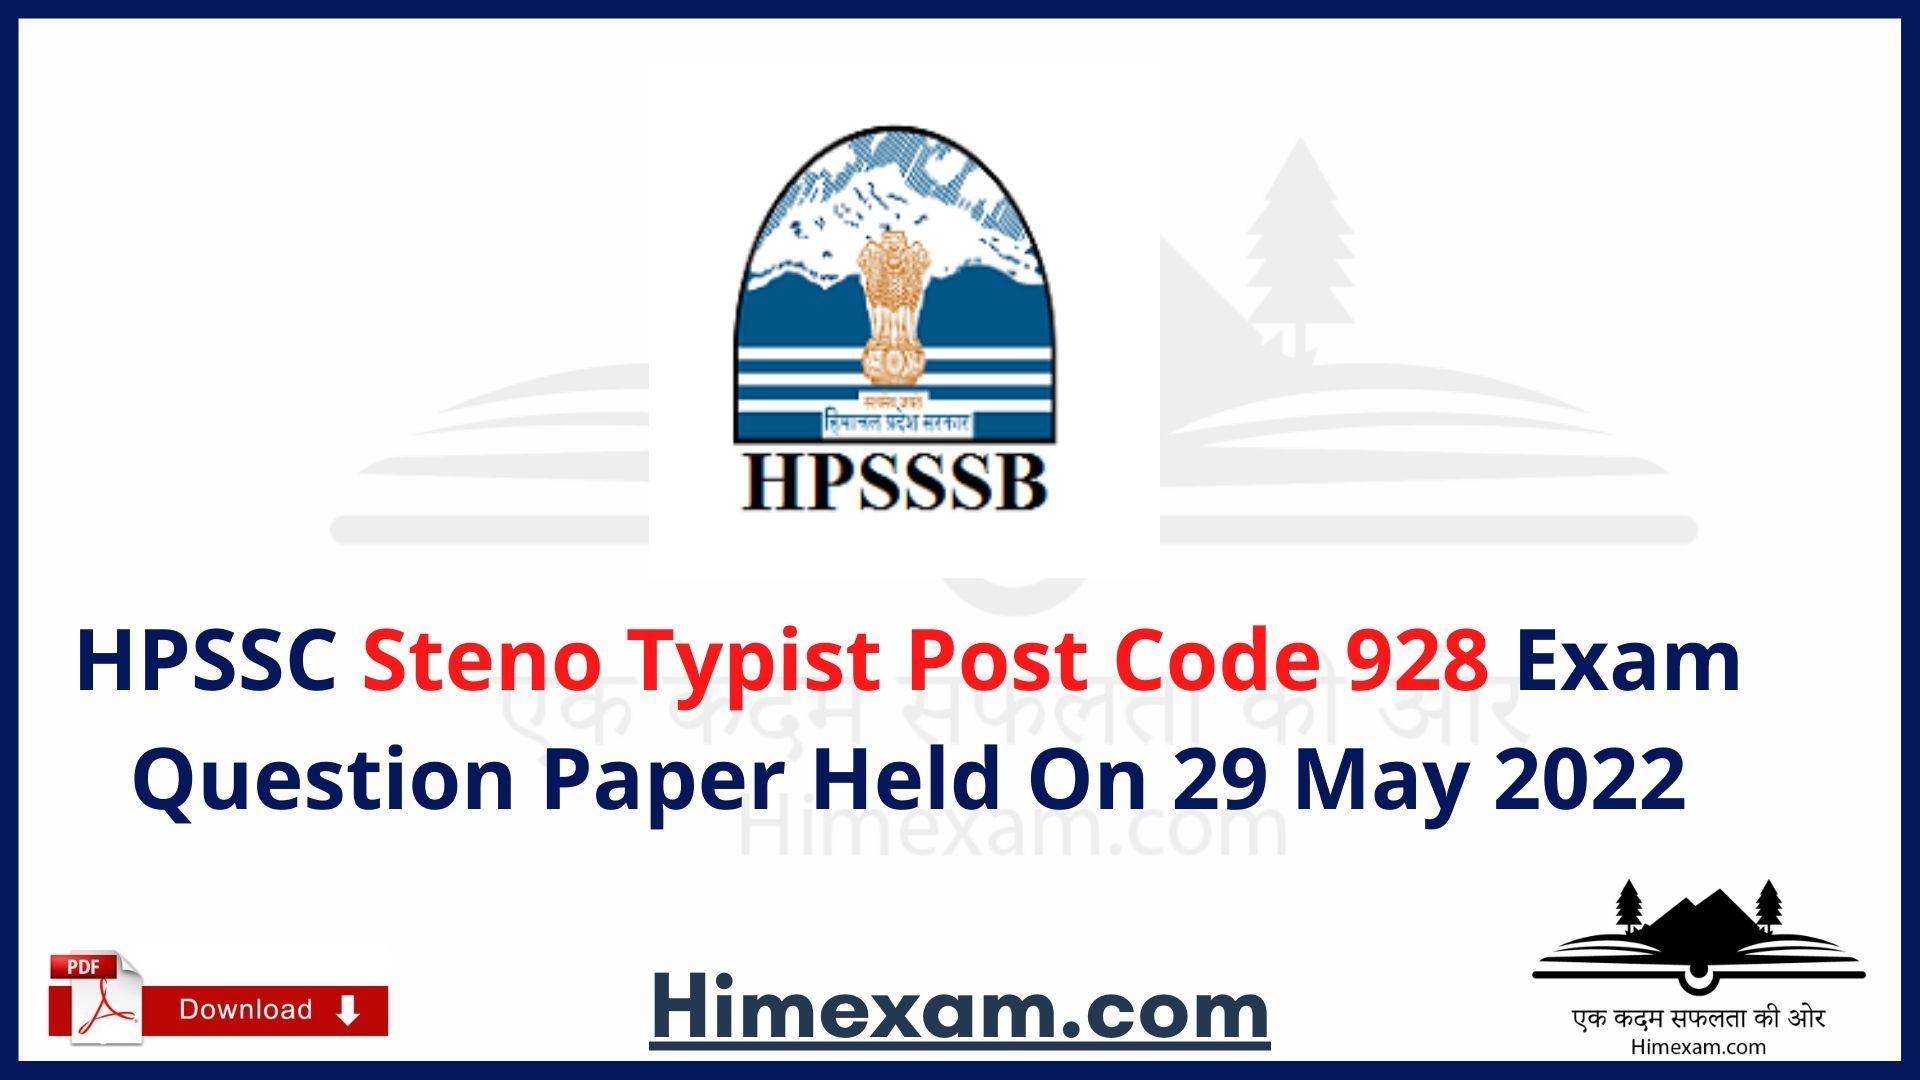 HPSSC Steno Typist Post Code 928 Exam Question Paper Held On 29 May 2022